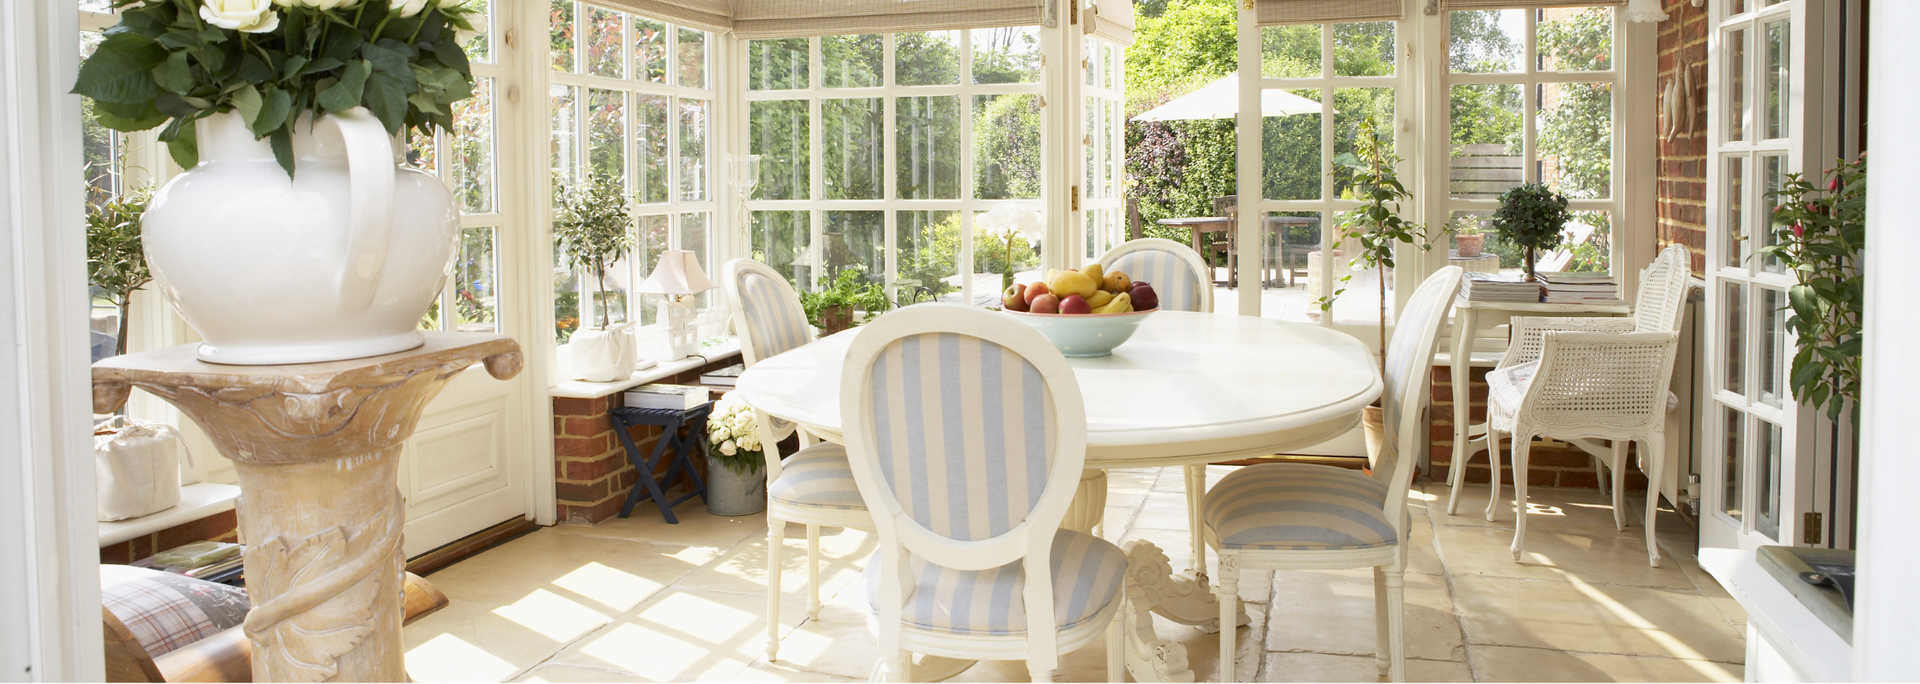 Picture of a conservatory with all-white furniture